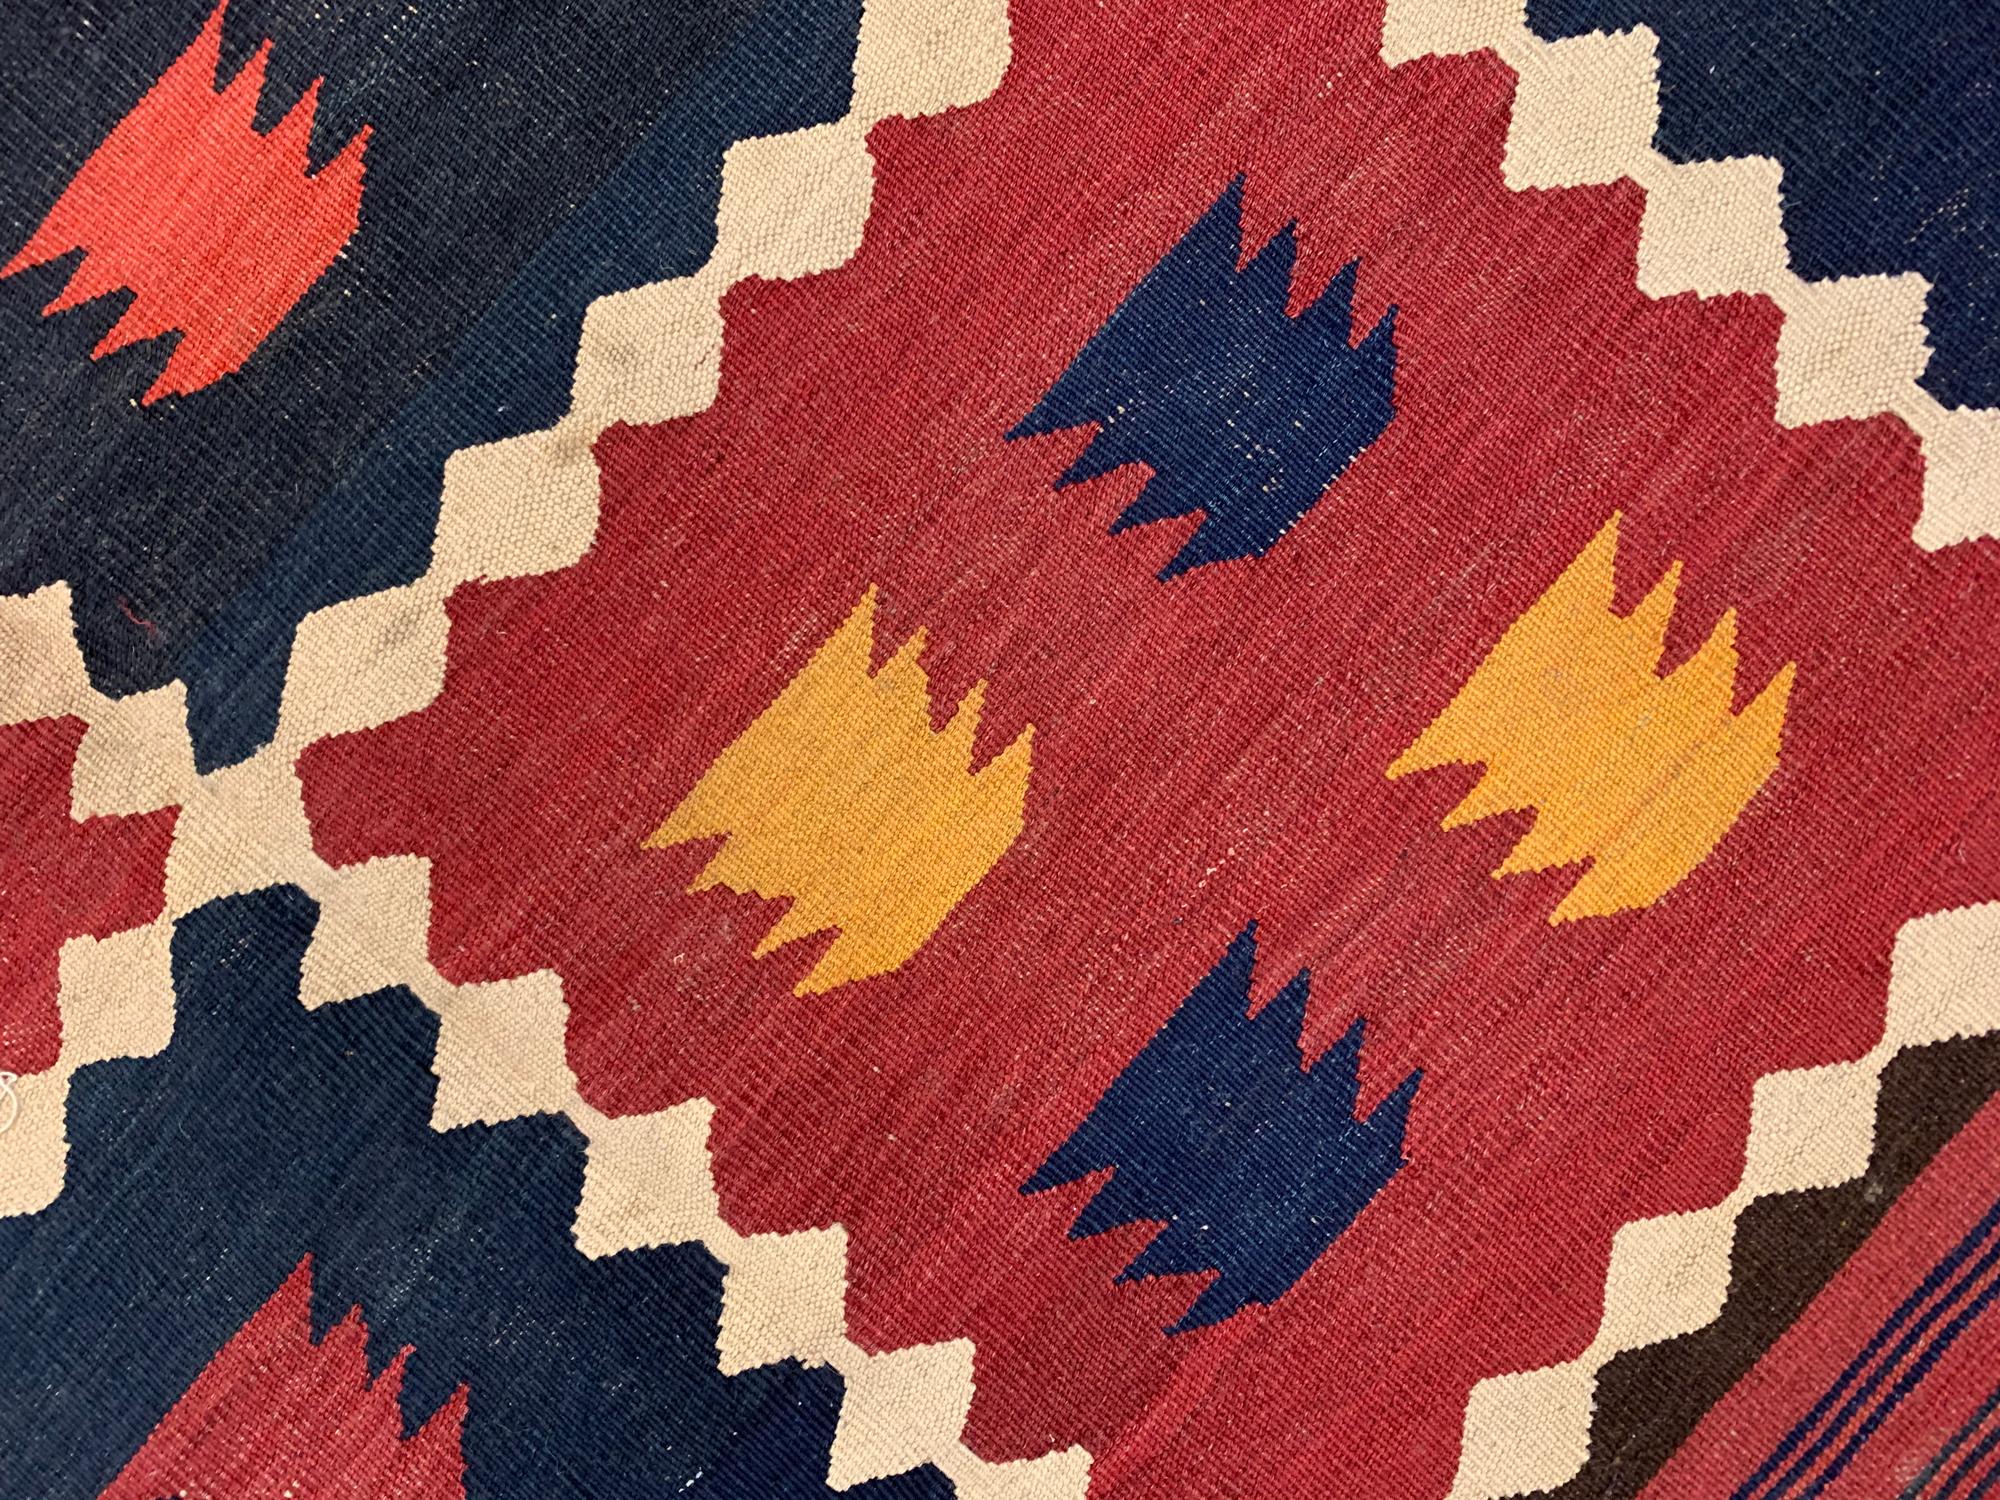 Antique Rugs Red Blue Wool Kilim Area Rug Flat-Woven Tribal Kilim In Excellent Condition For Sale In Hampshire, GB